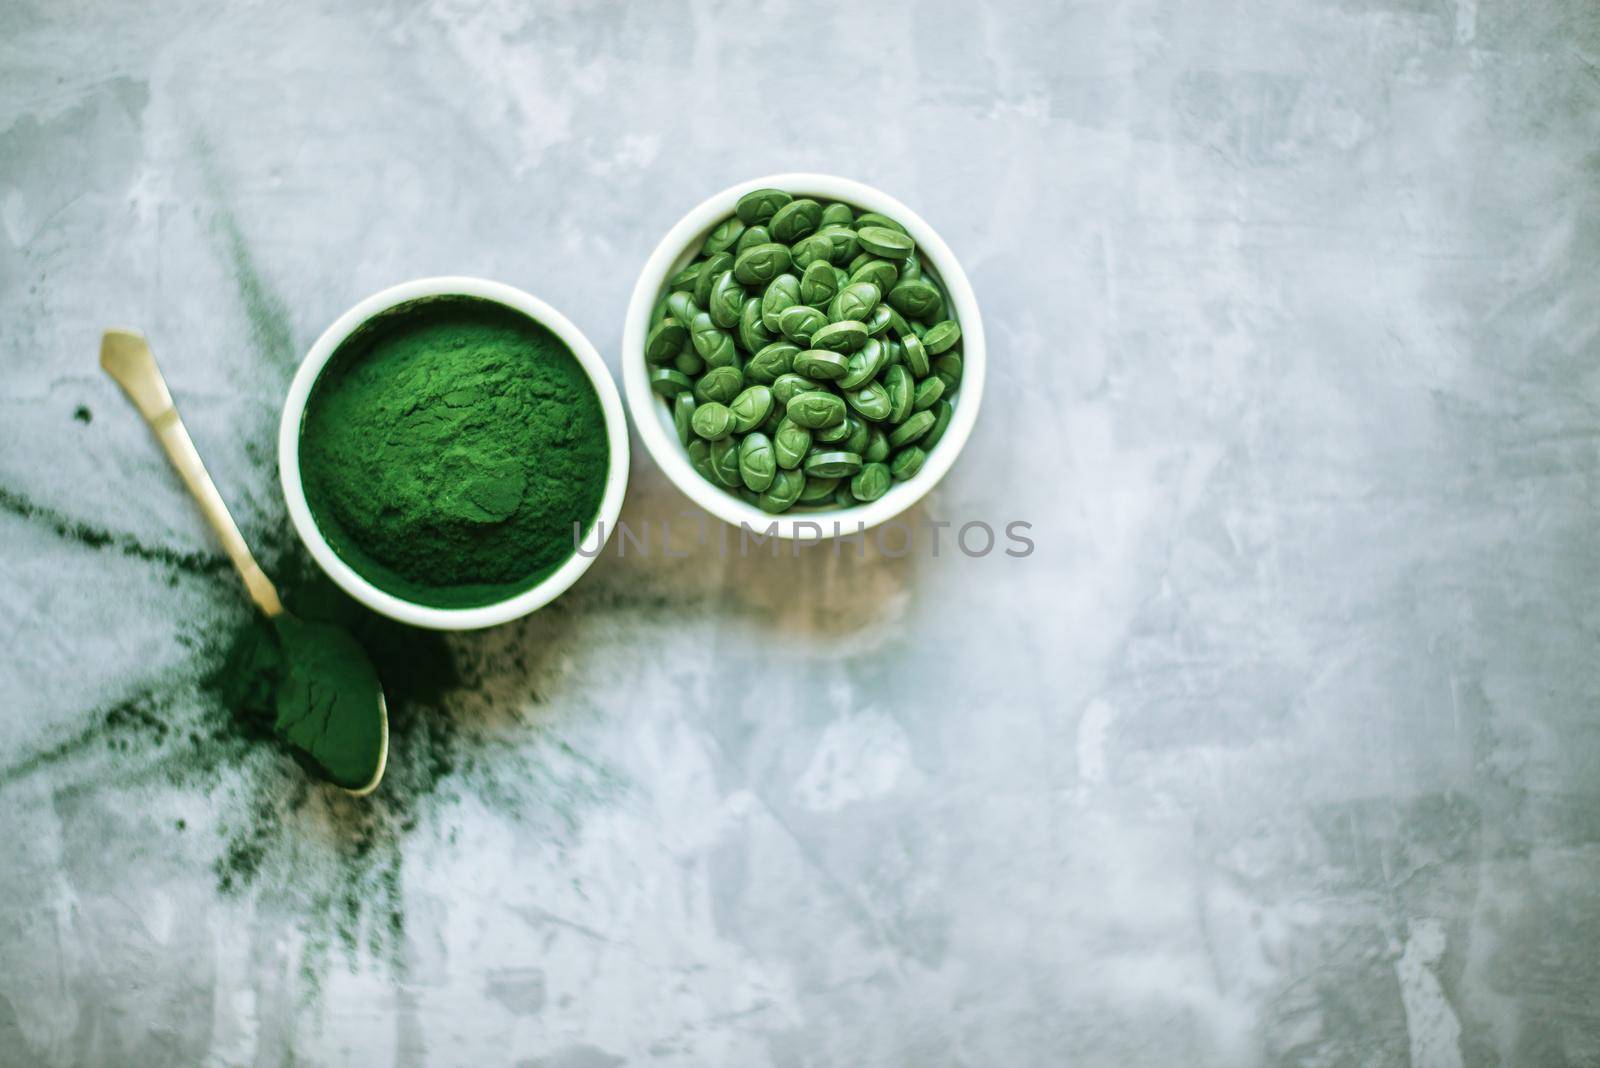 spirulina powder and tablets in white plates on concrete background. top view